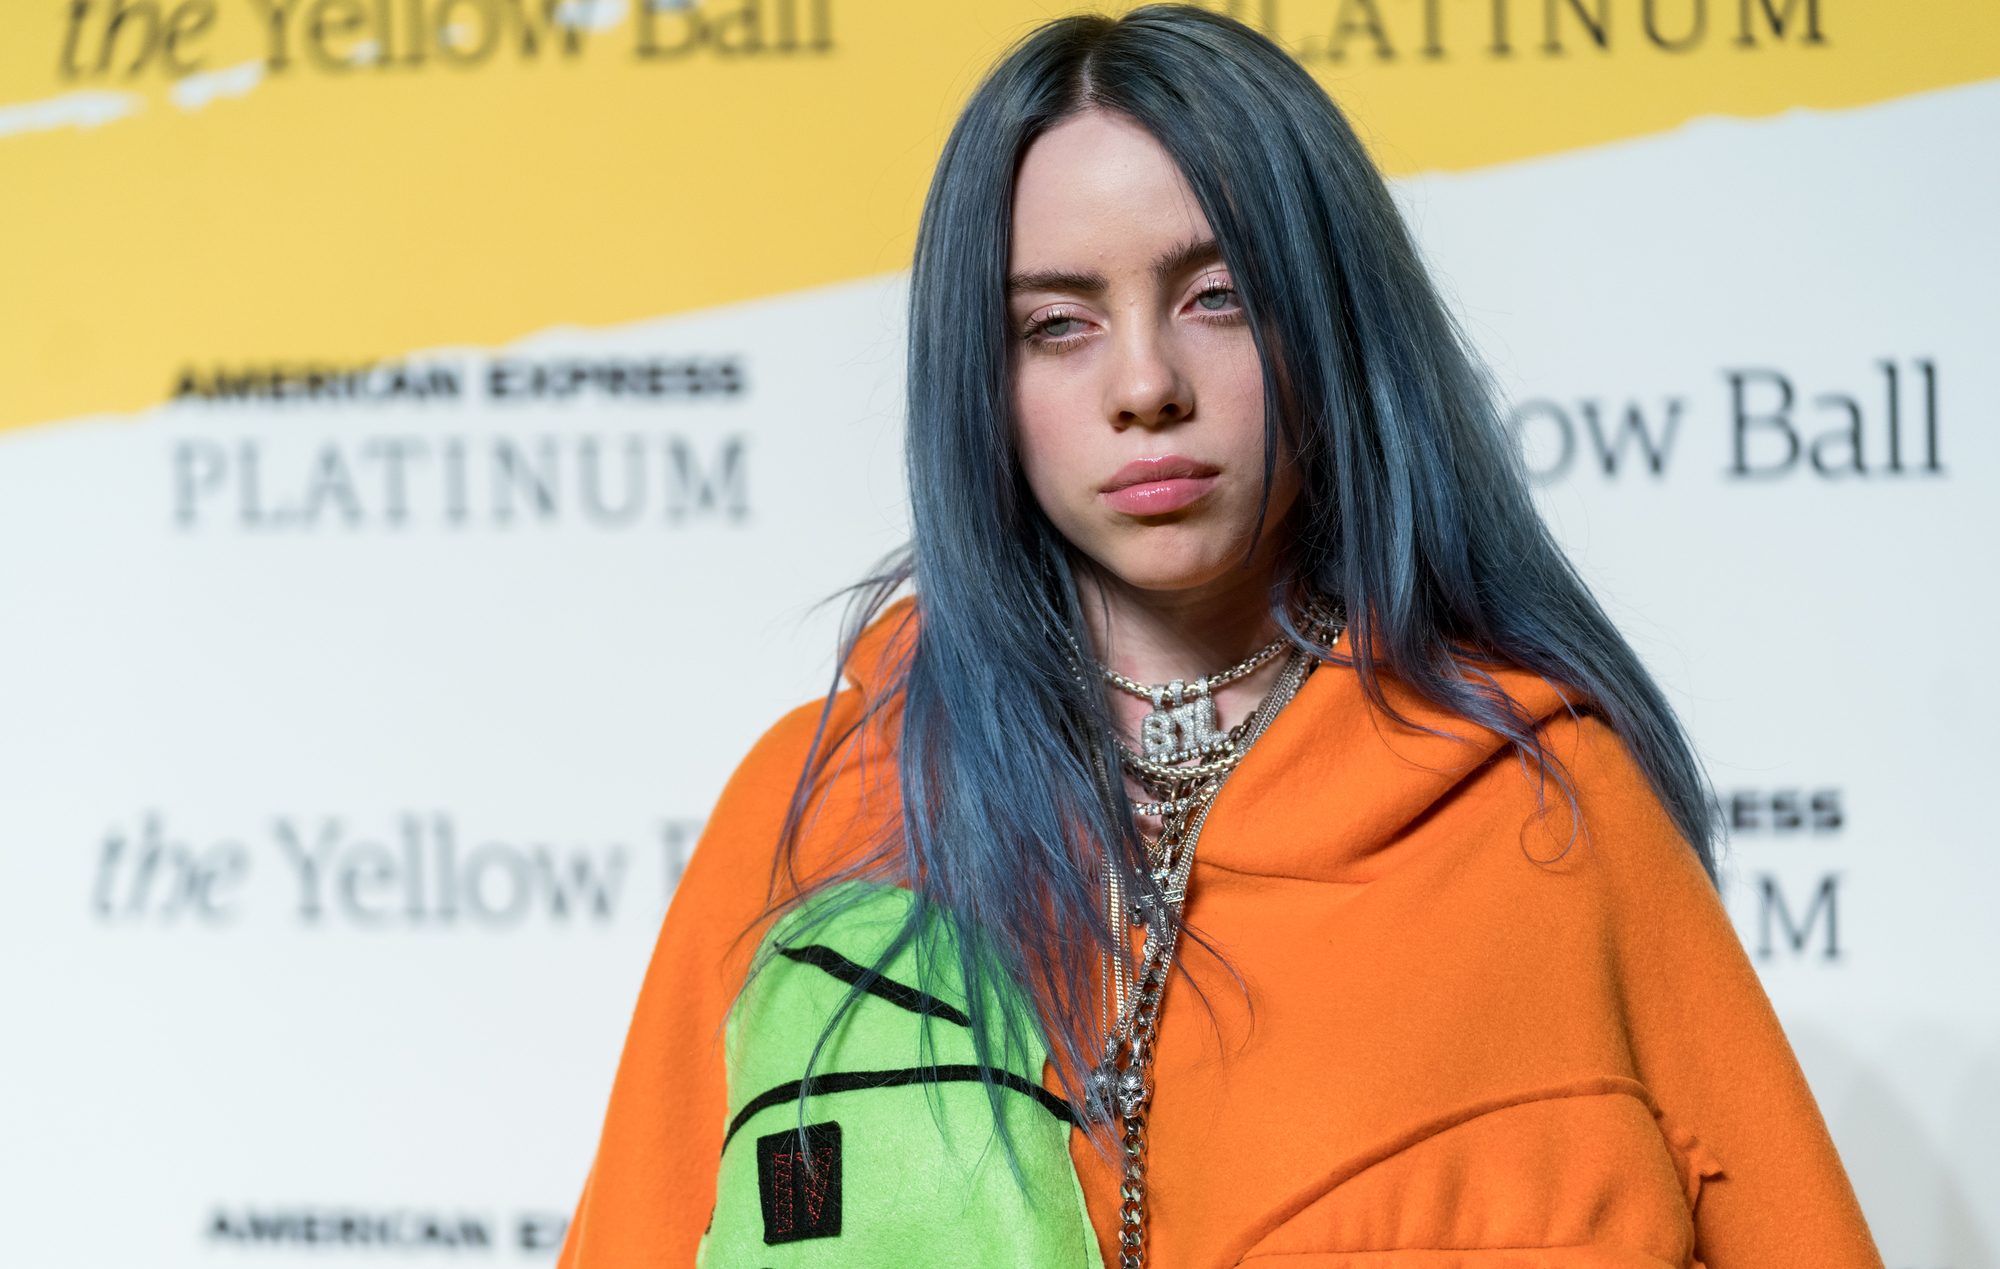 Billie Eilish sparks debate after revealing why she wears baggy clothes in new ad campaign